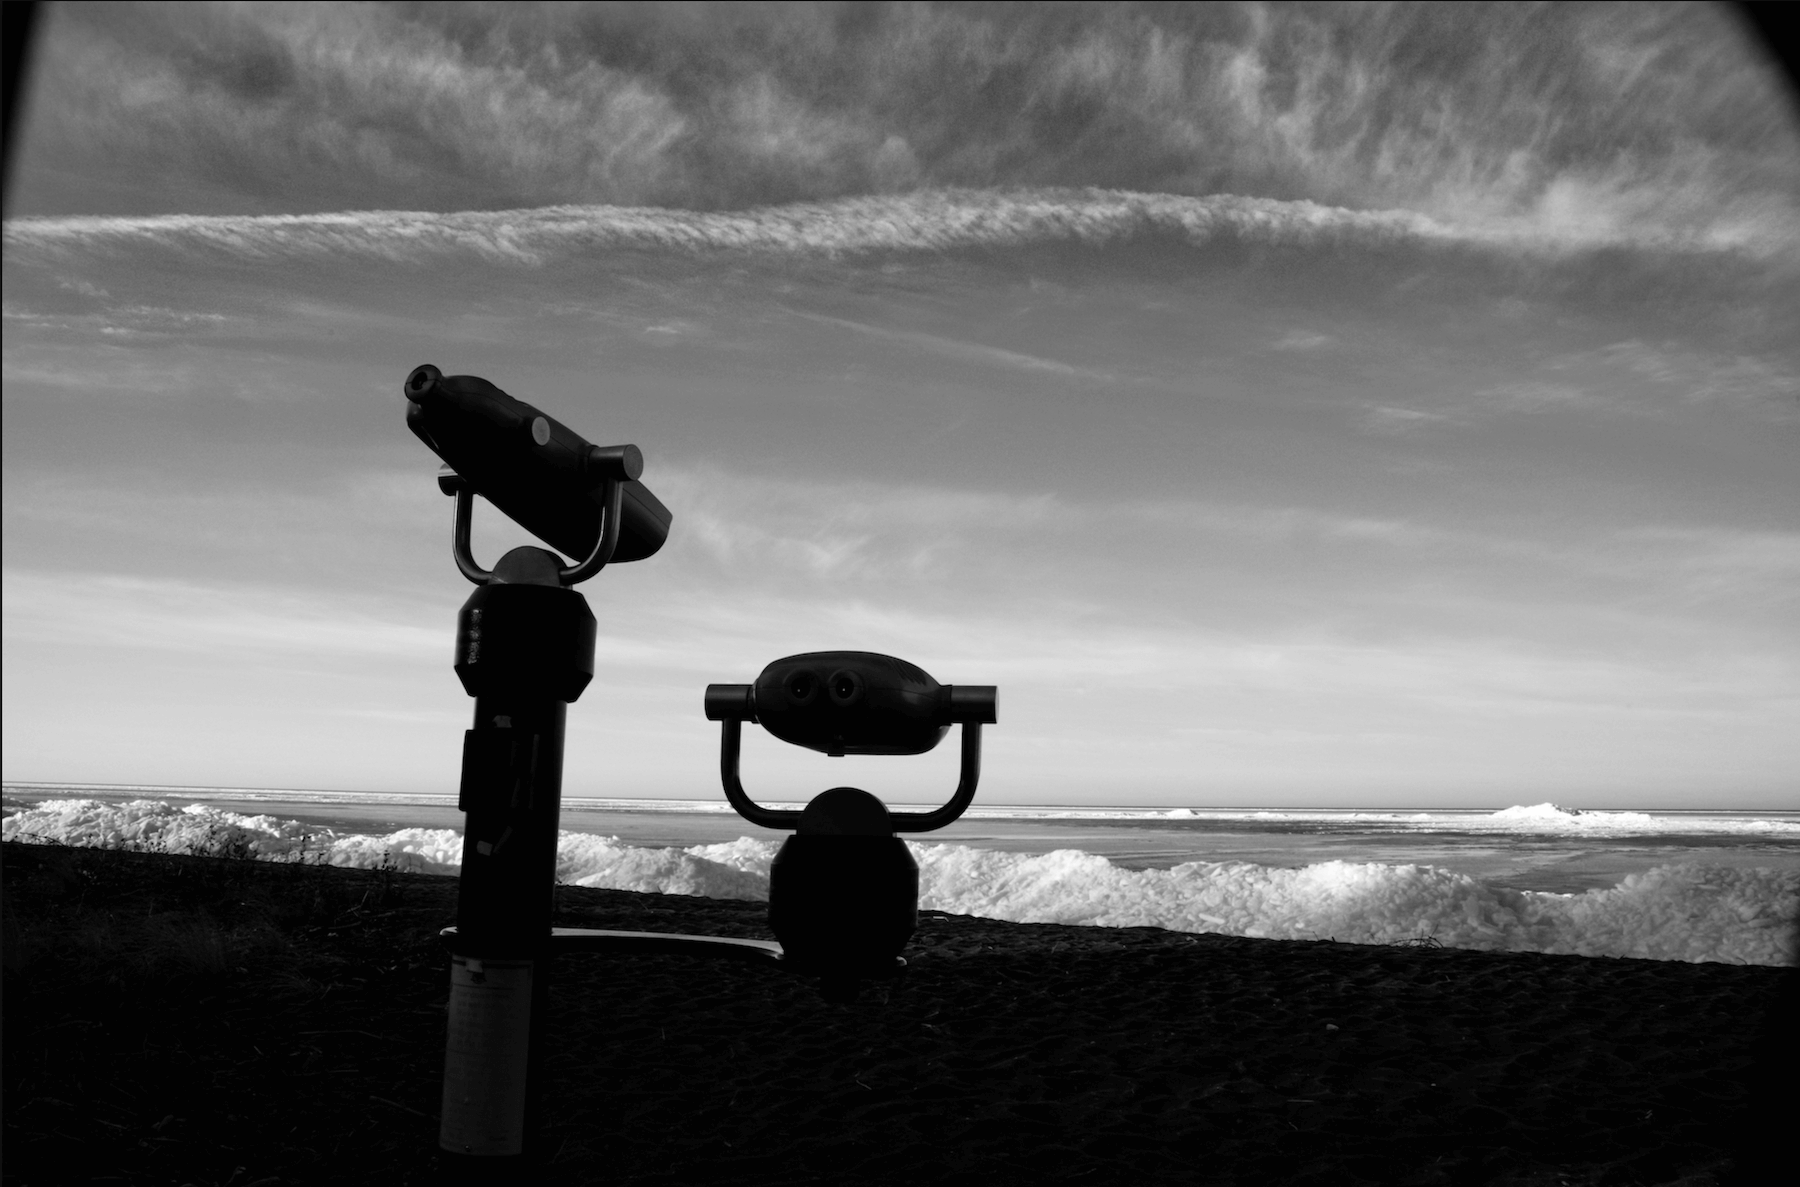 observation devices used for observing scenery at a provincial park